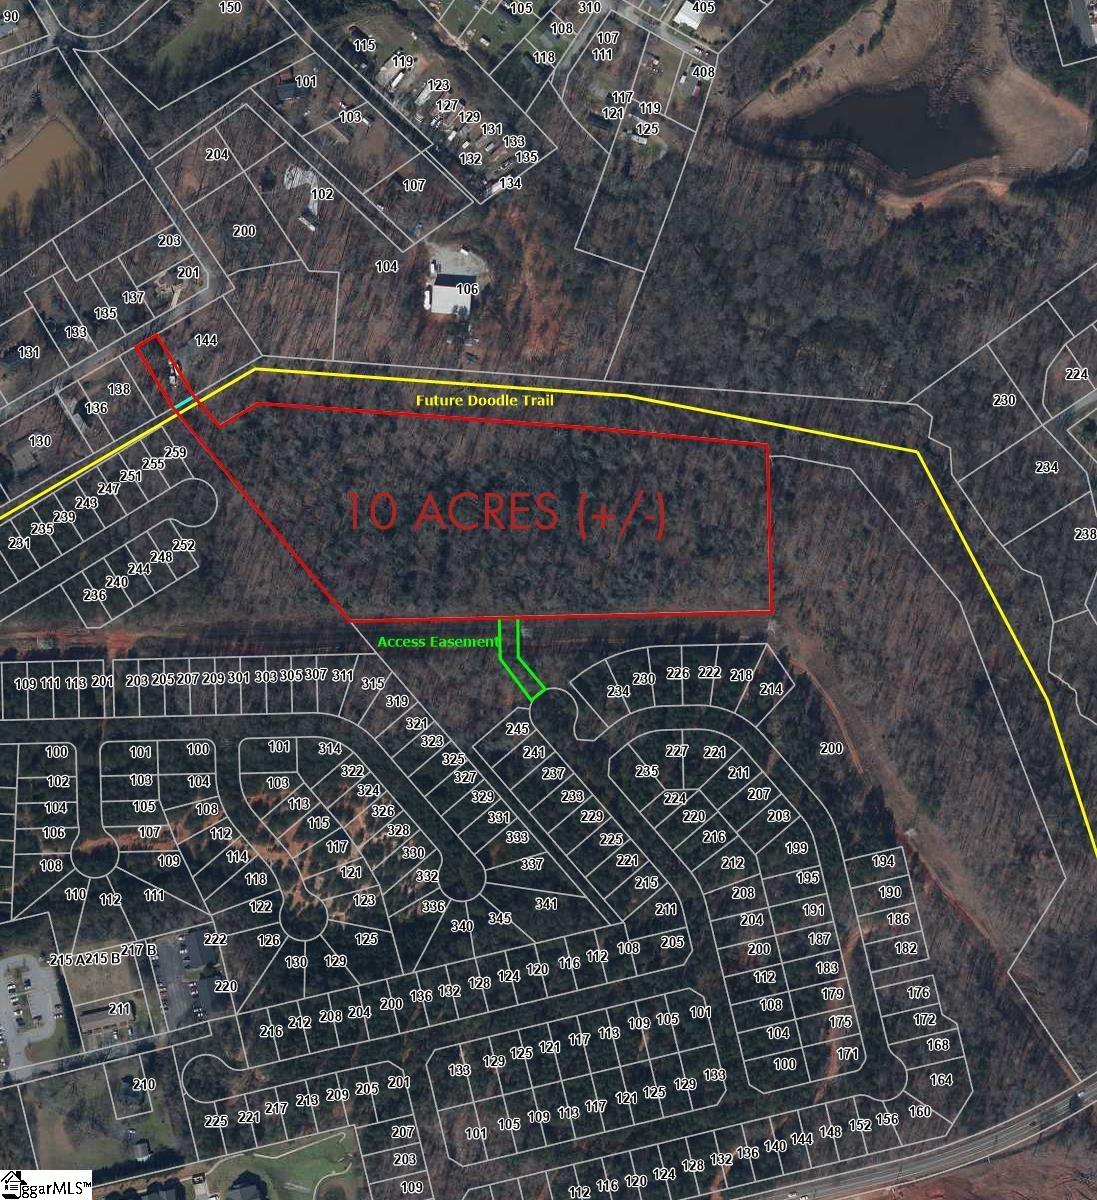 This shows the approximate property outline in red, with Doodle Trail in yellow, and the easement access in green. All markings in photo are approximate.